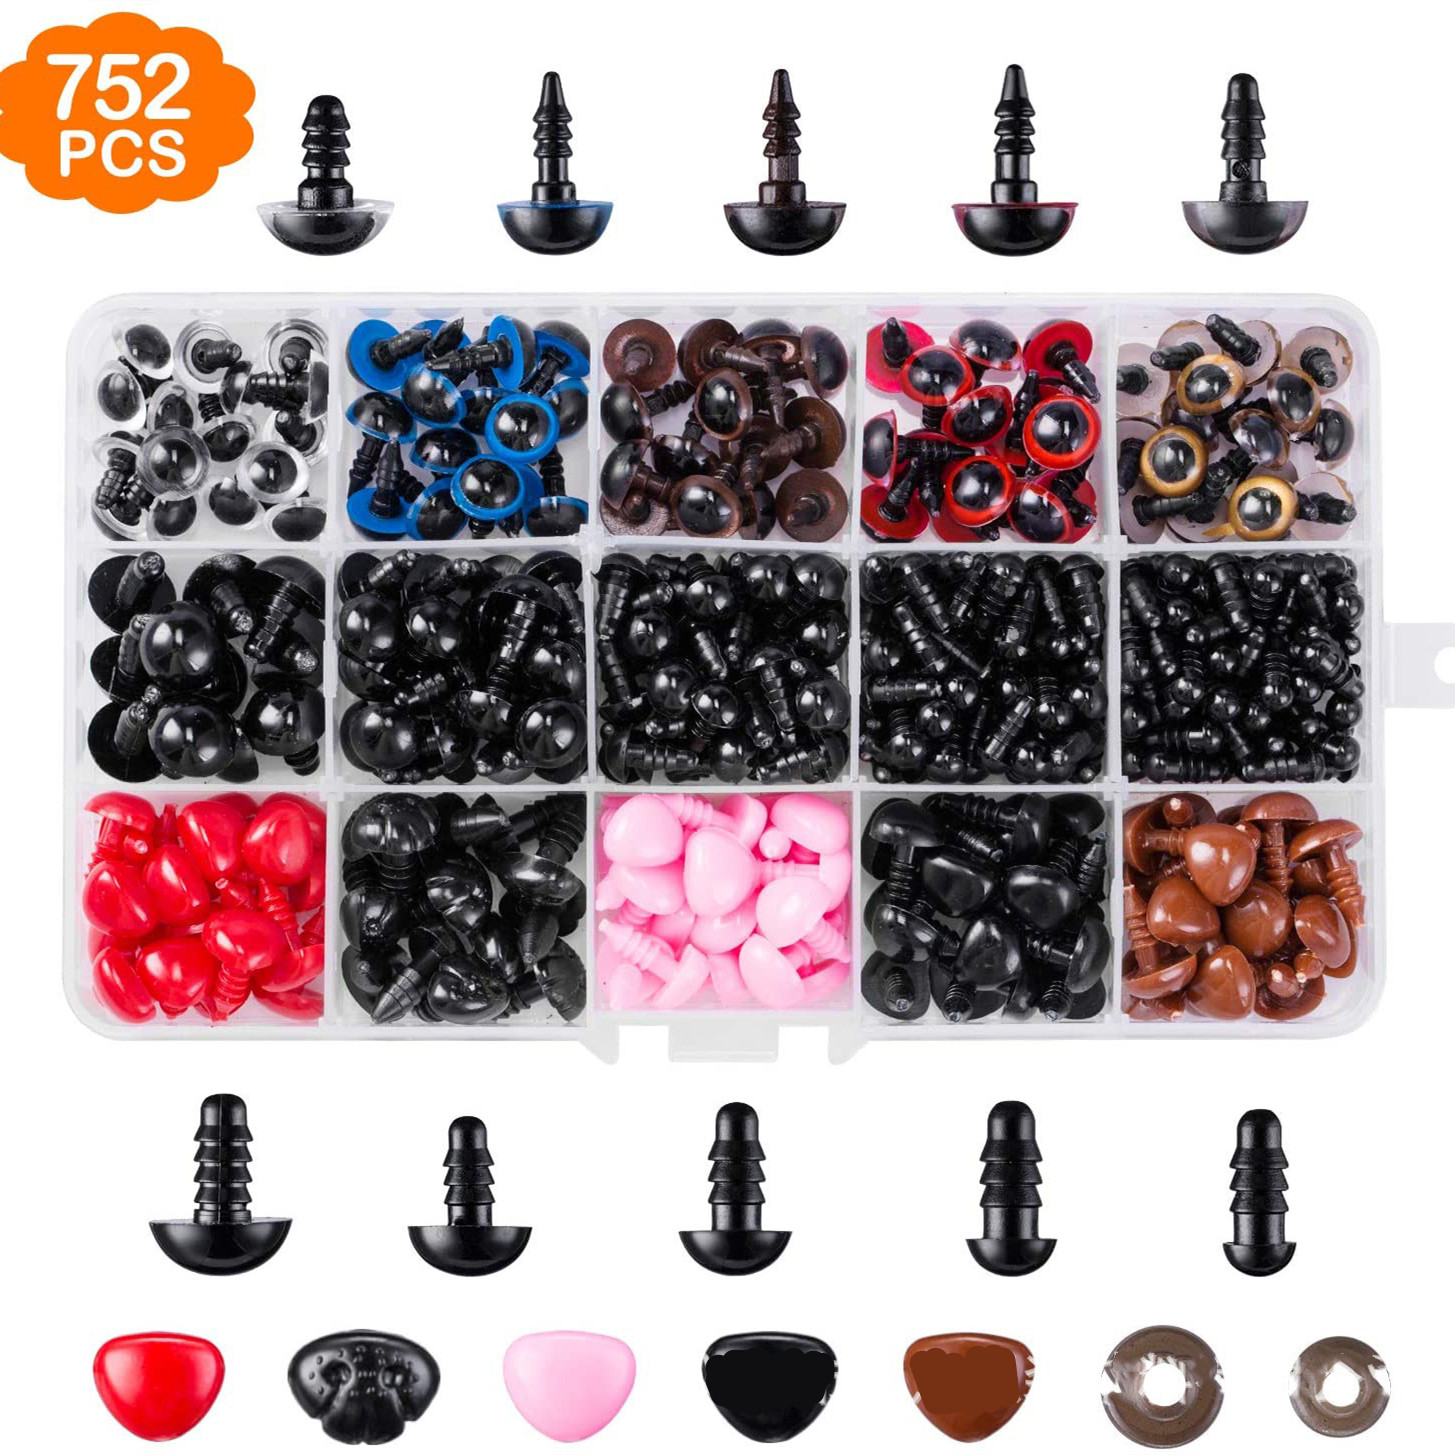 Plastic Safety Eyes and Noses, 560Pcs Crochet Eyes with Washers, Teddy Bear  Eyes for Doll Making 